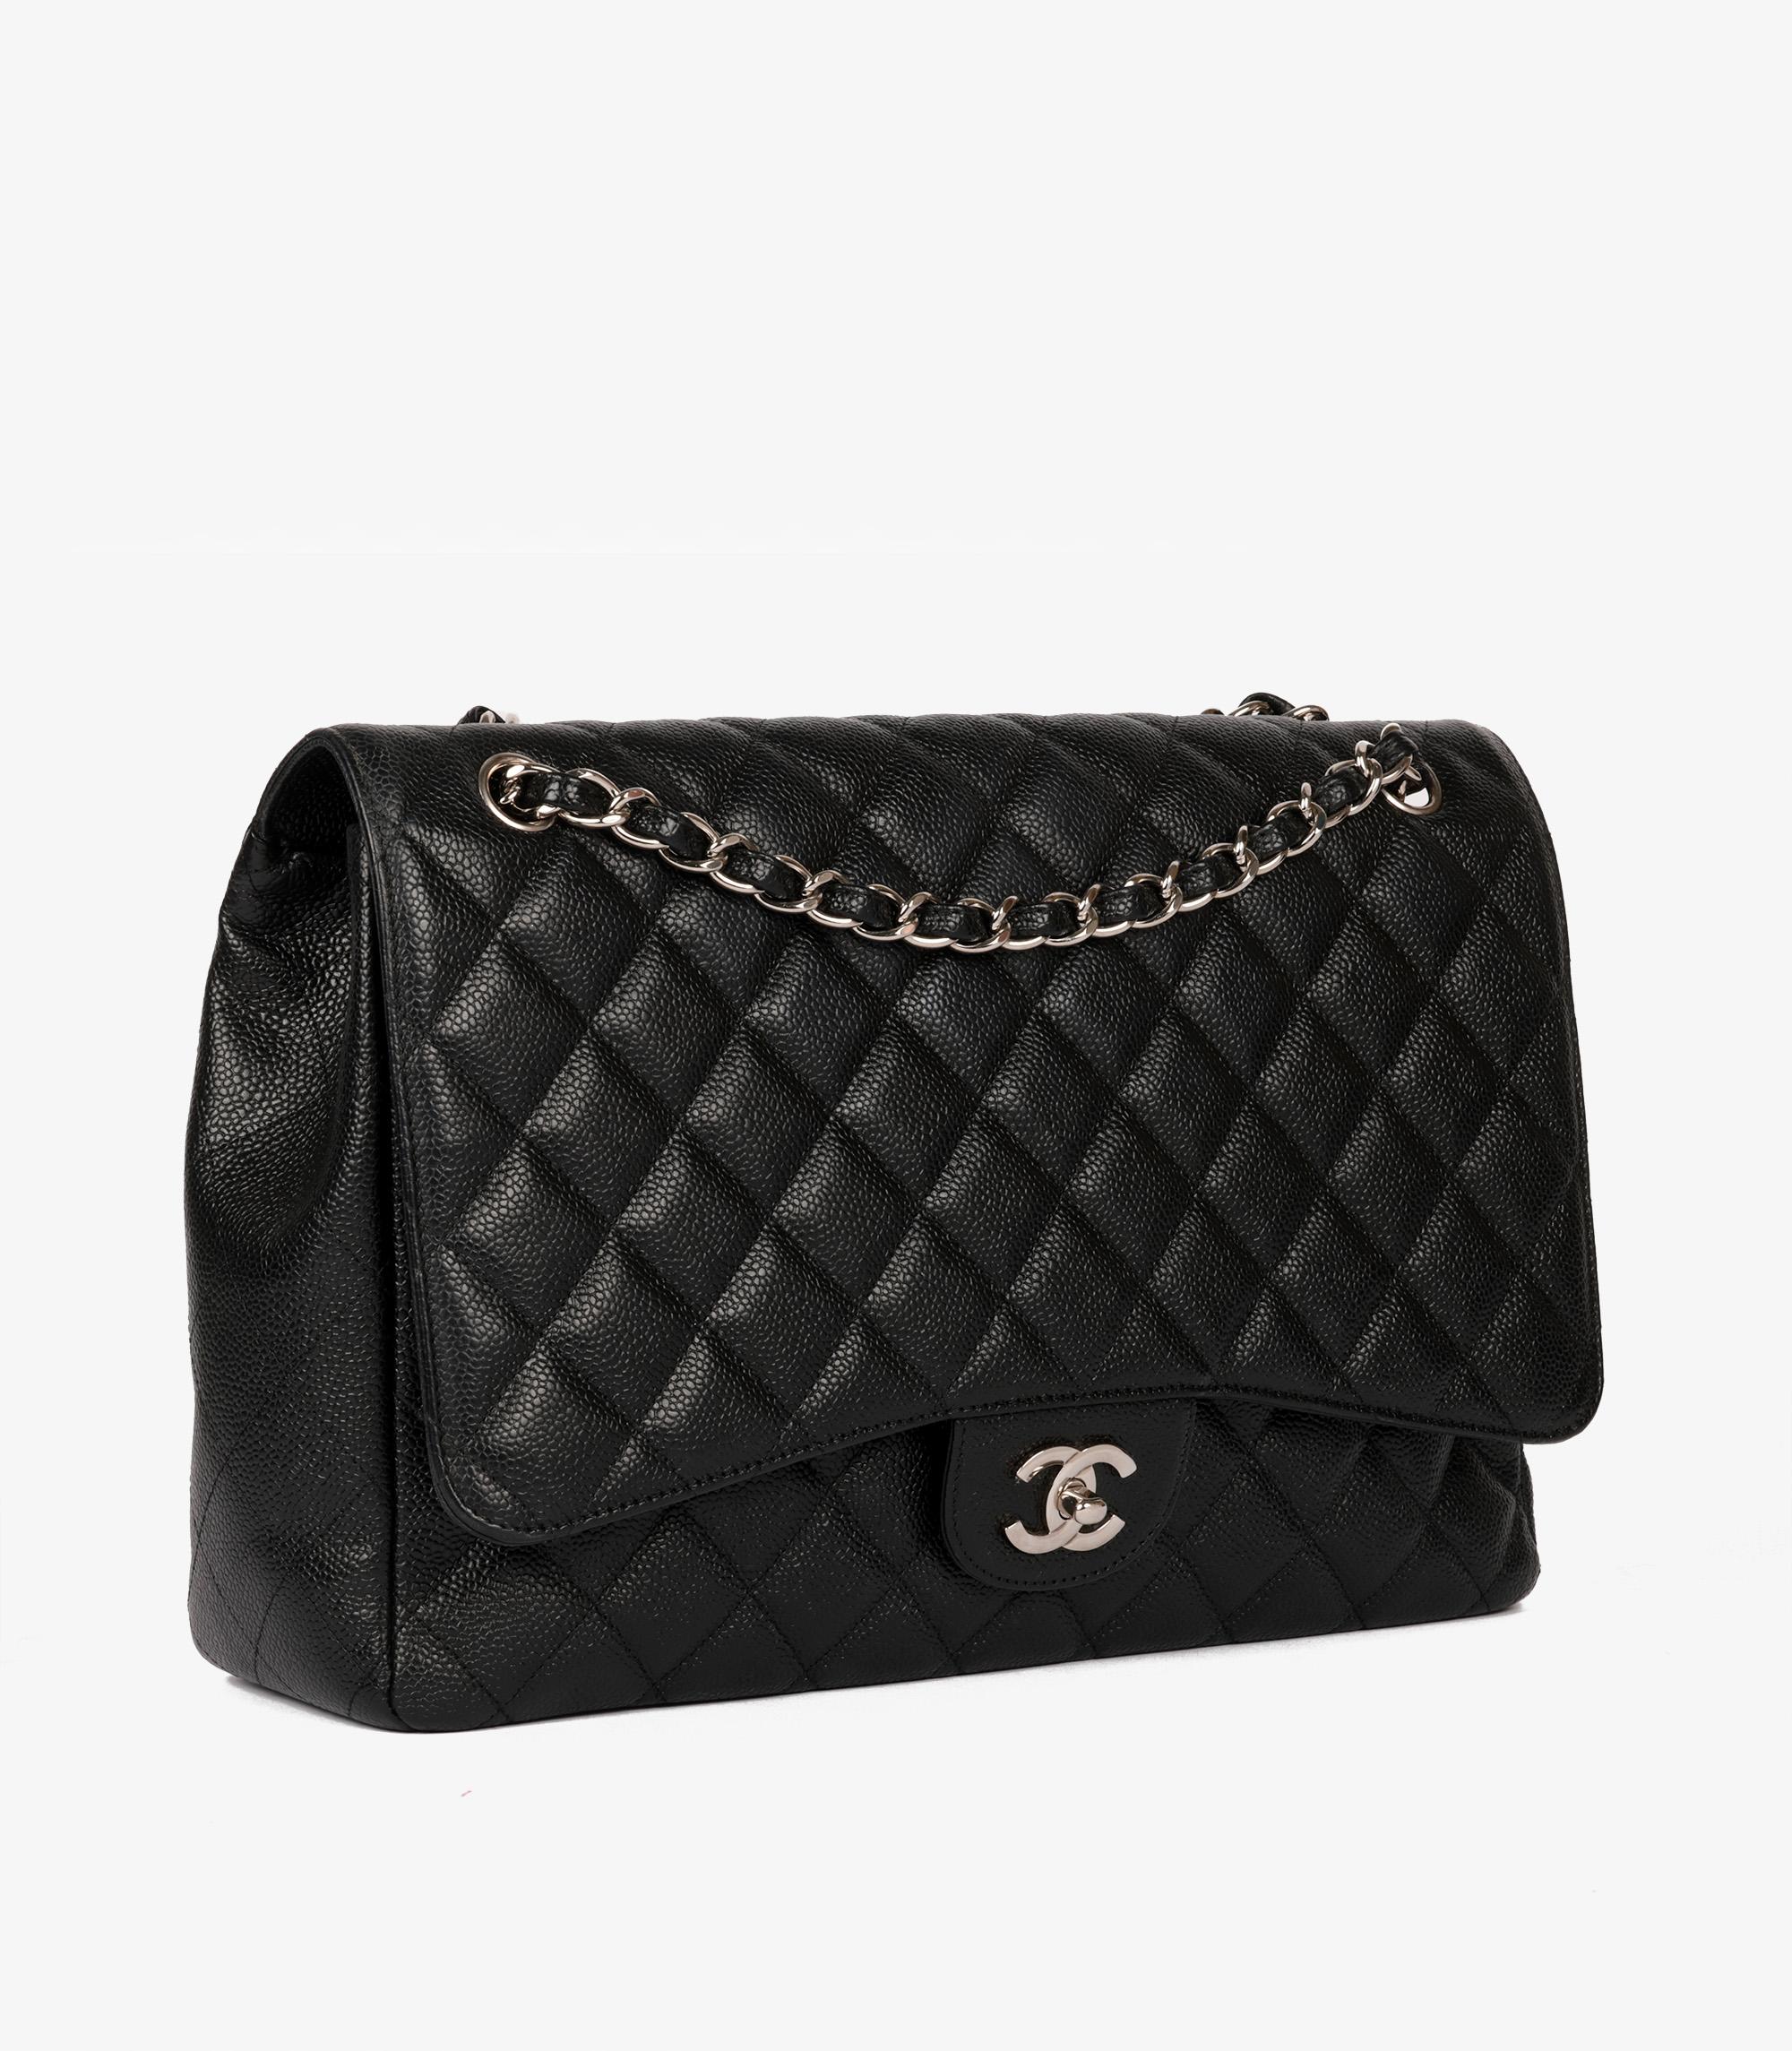 Chanel Black Quilted Caviar Leather Maxi Classic Single Flap Bag In Excellent Condition For Sale In Bishop's Stortford, Hertfordshire